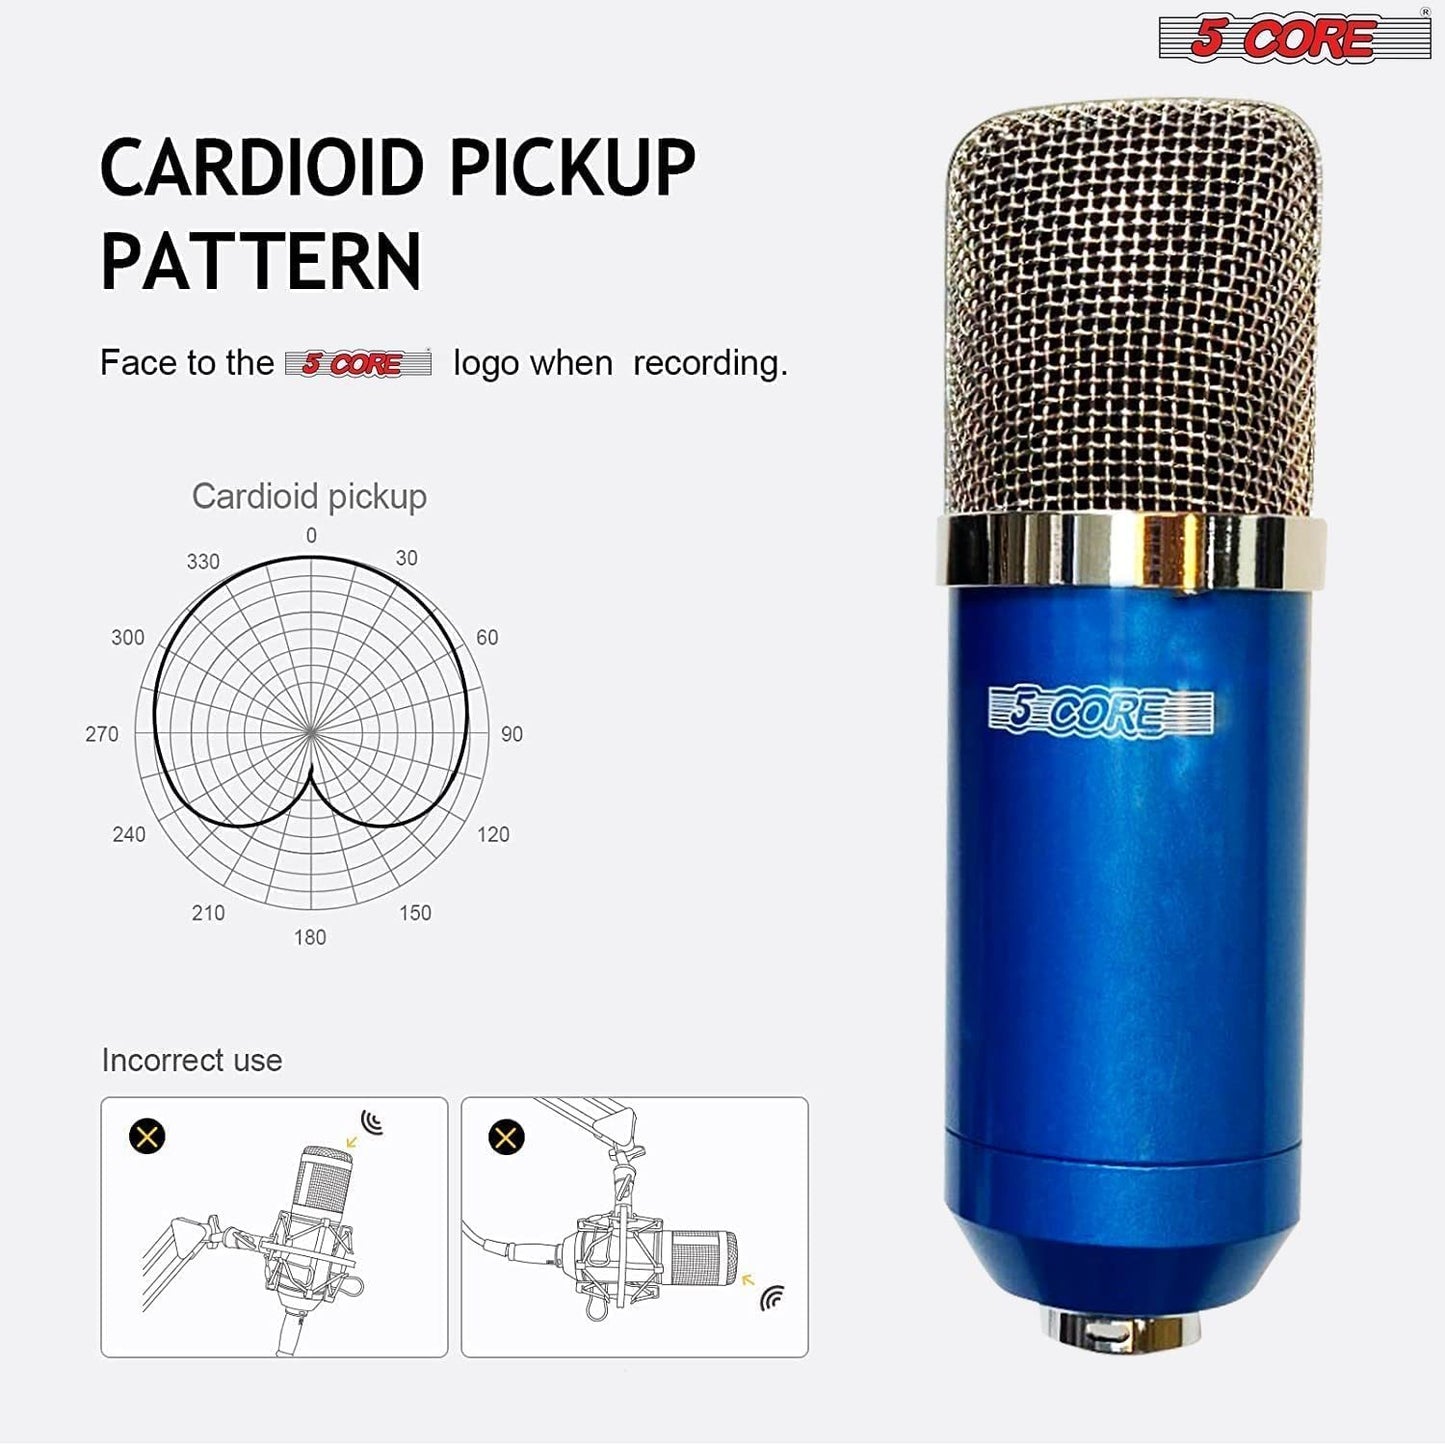 XLR Microphone Condenser Mic for Computer PC Gaming; Podcast Desktop Tripod Stand Kit for Streaming; Recording; Vocals; Voice; Cardioids Studio Microphone 5 Core RM 7 BLU